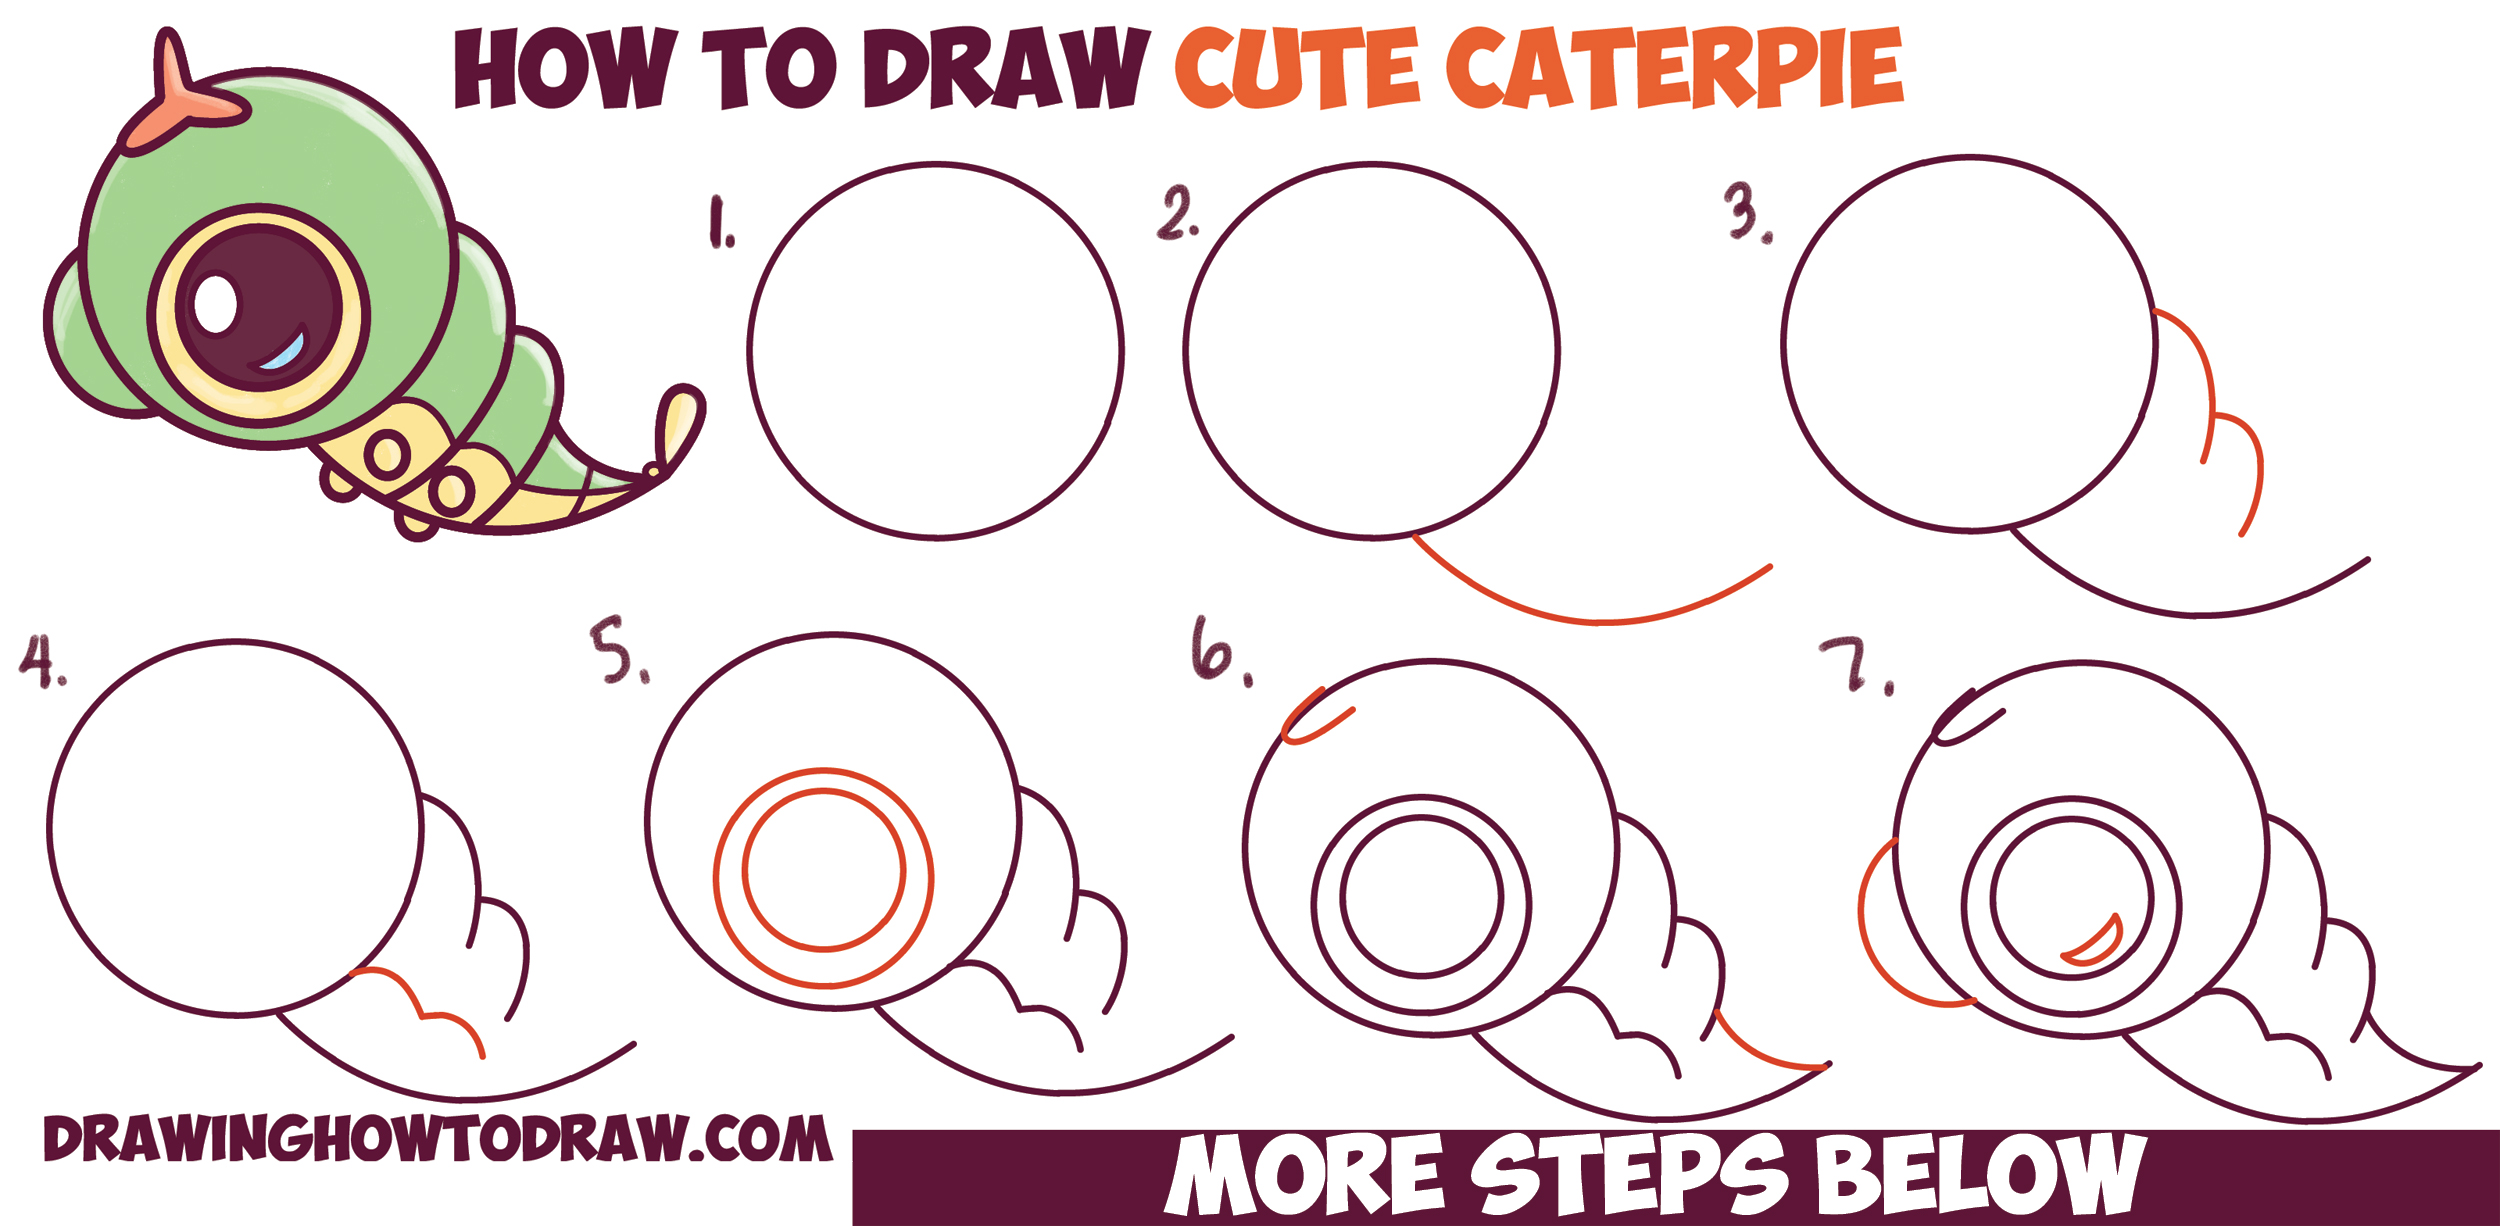 How to Draw Cute / Chibi / Kawaii Caterpie from Pokemon Easy Step by Step Drawing Tutorial for Kids